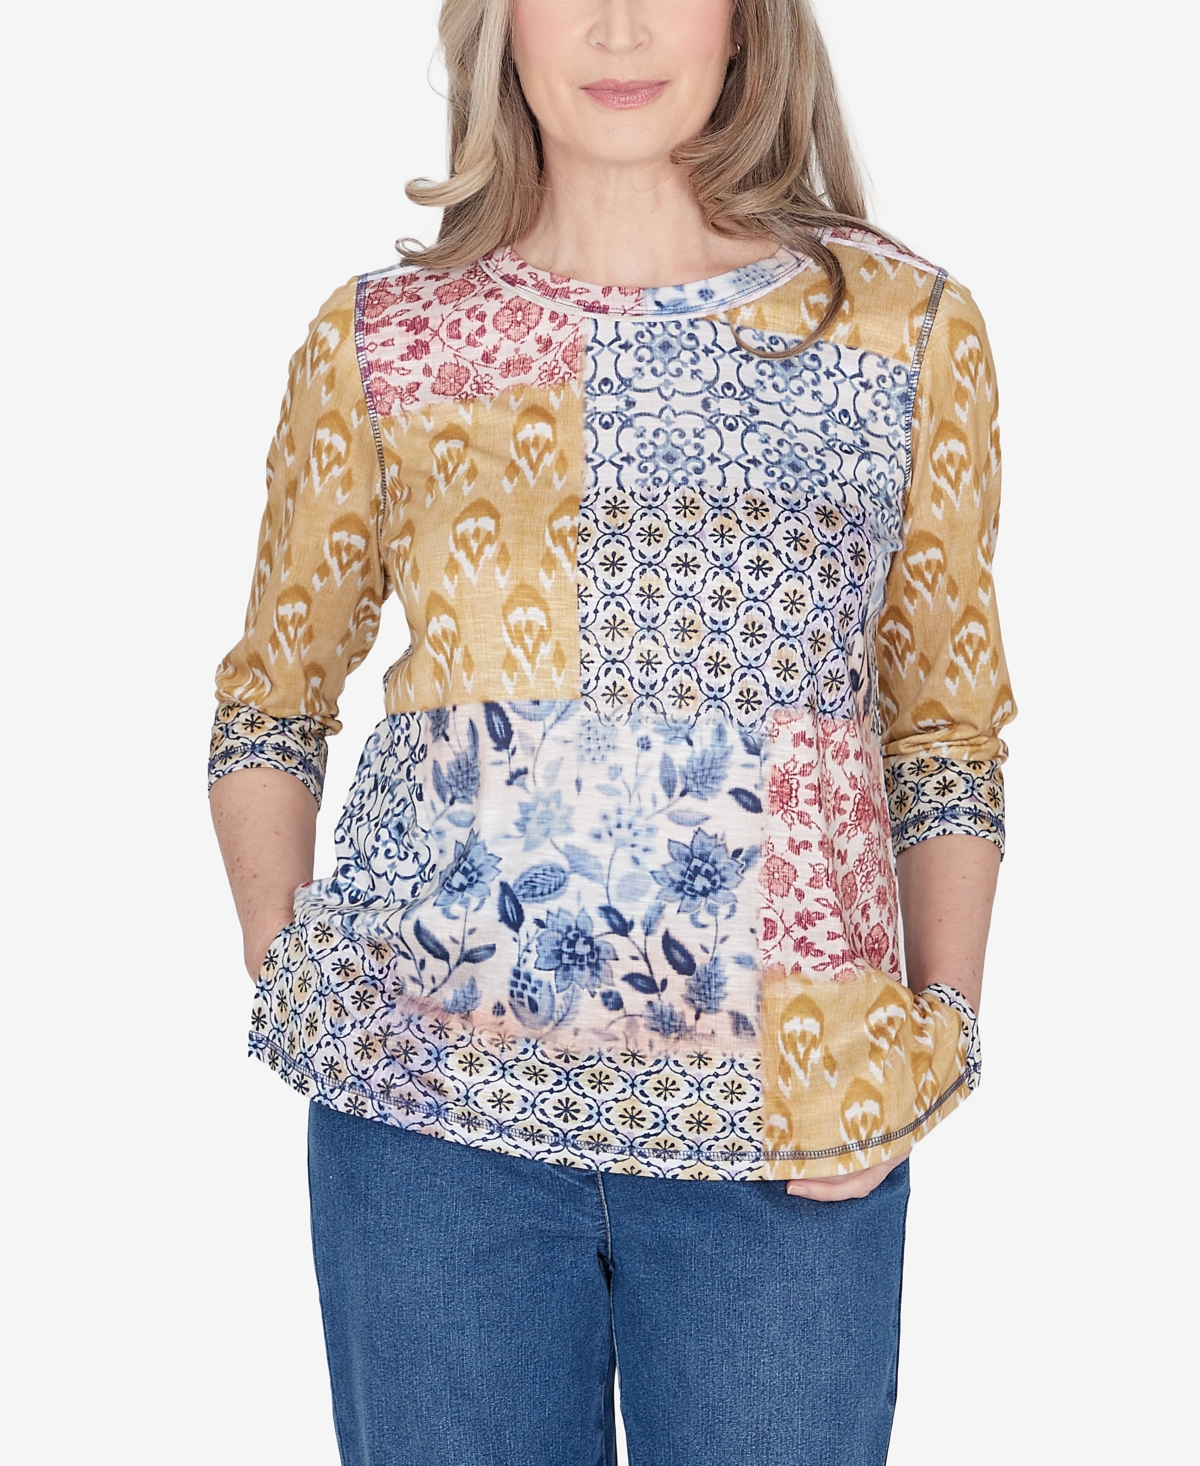 Petite Scottsdale Abstract Patchwork Printed Top - Multi